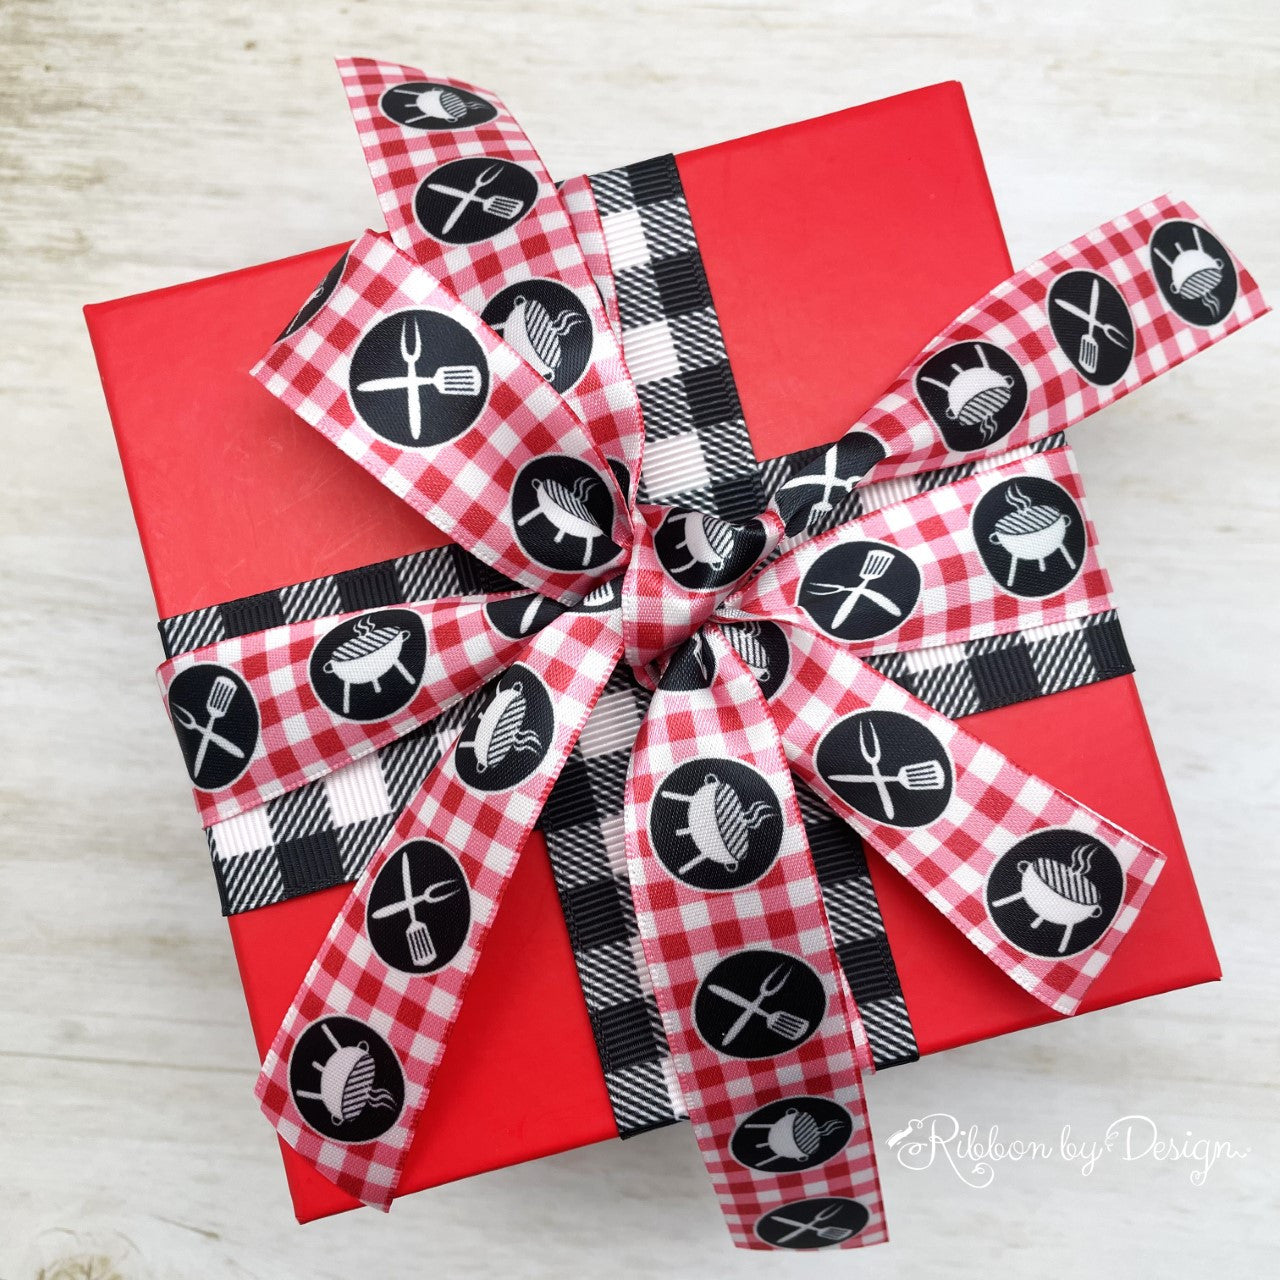 Mix and match our barbecue grill ribbon with black and white gingham for a fun gift wrap look!